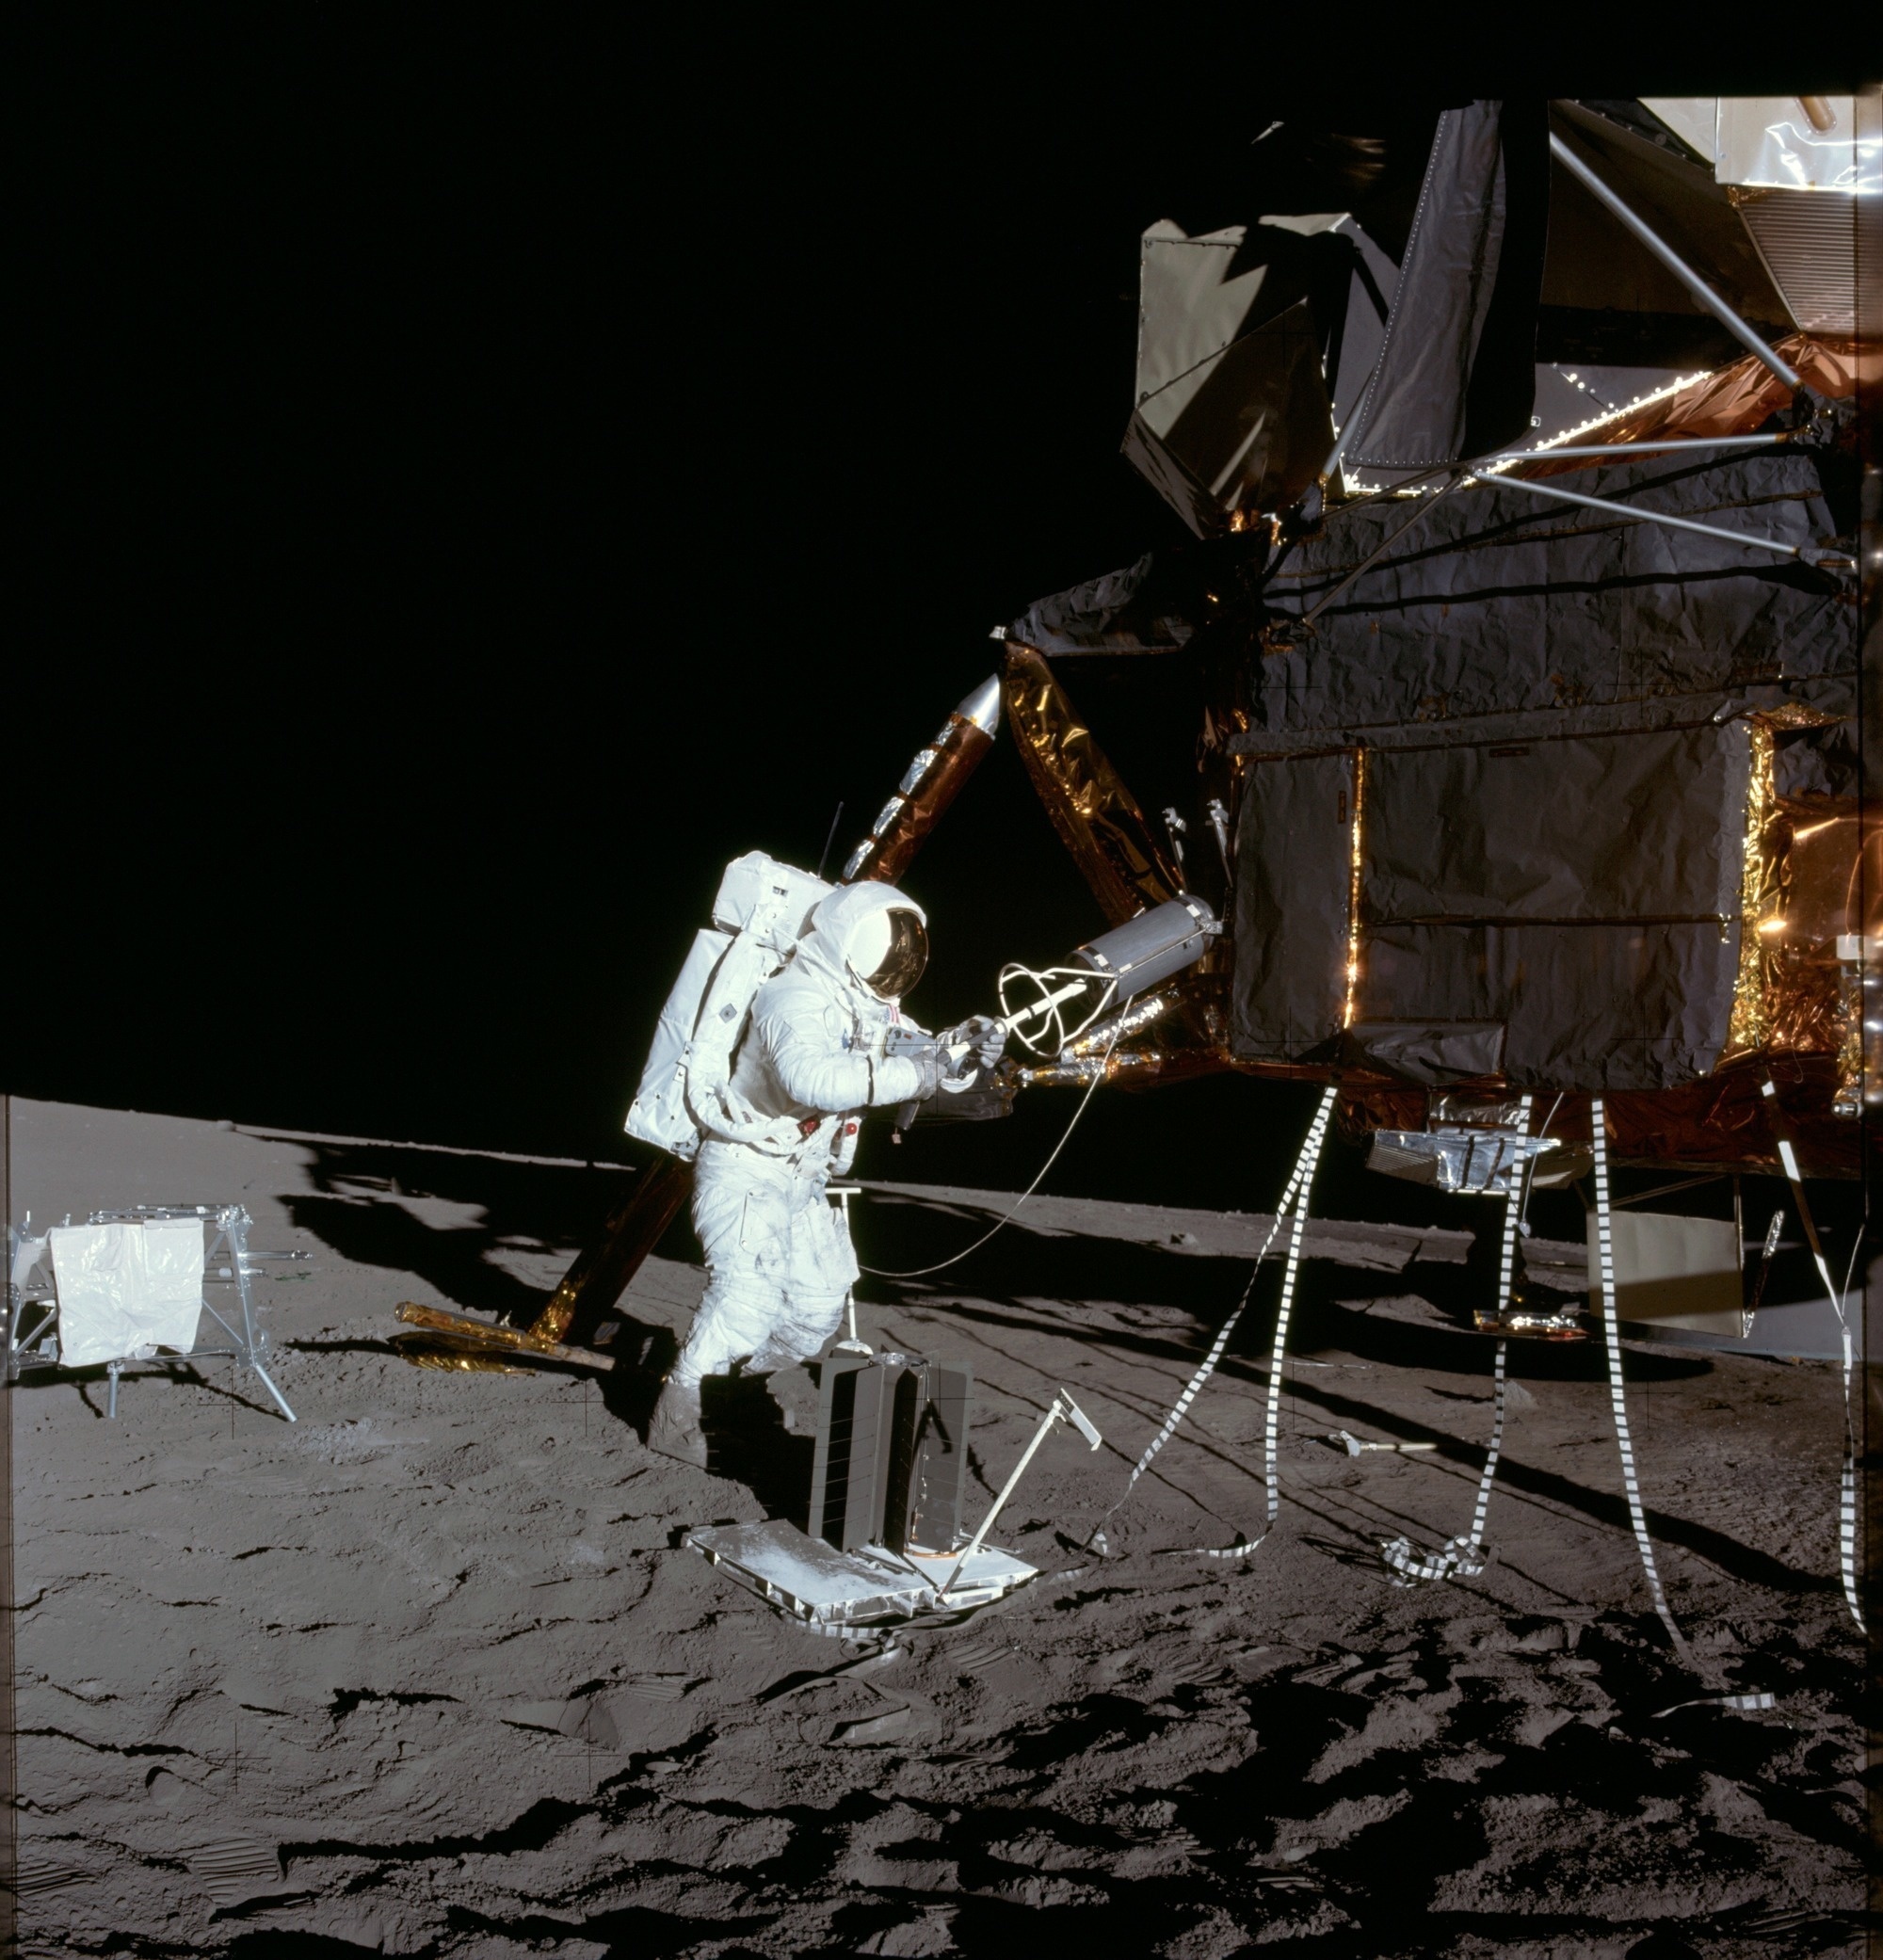 1969: Alan Bean, an Apollo 12 astronaut, adds Plutonium 238 fuel into the SNAP 27 (system for nuclear auxiliary power) radioisotope thermoelectric generator.